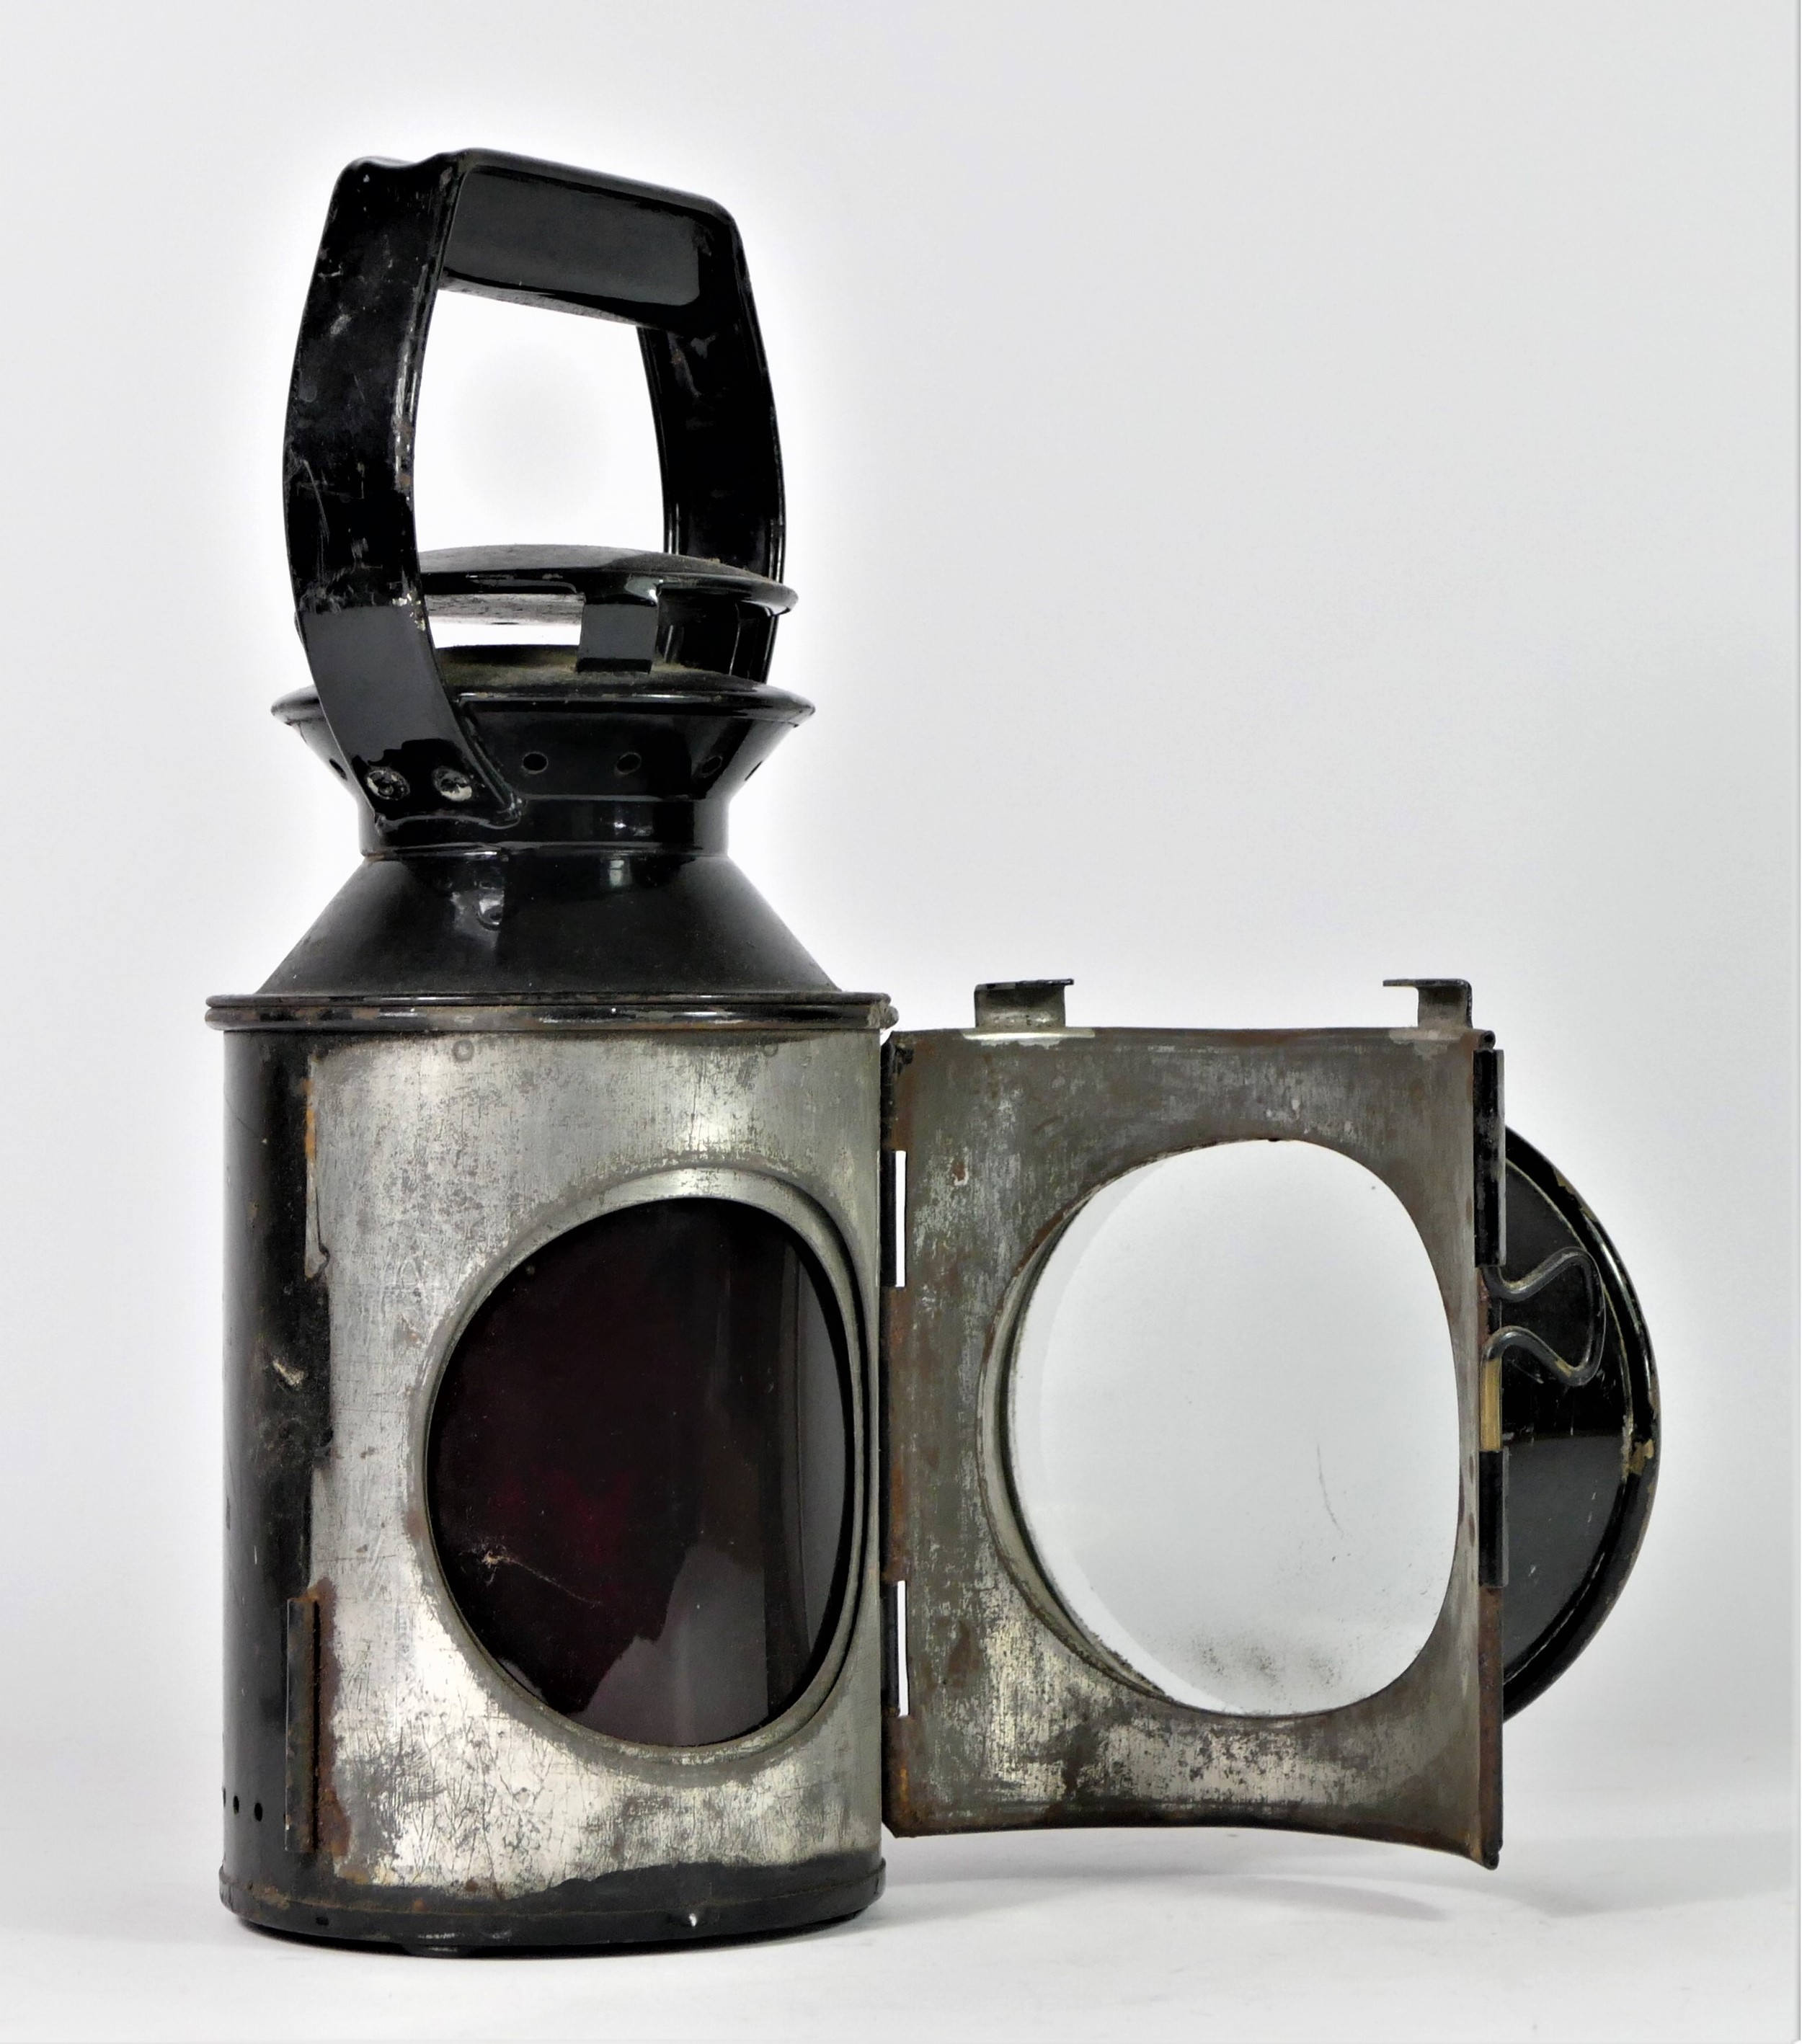 A B.R three aspect hand lamp, complete with burner, 30cm tall - Image 2 of 7